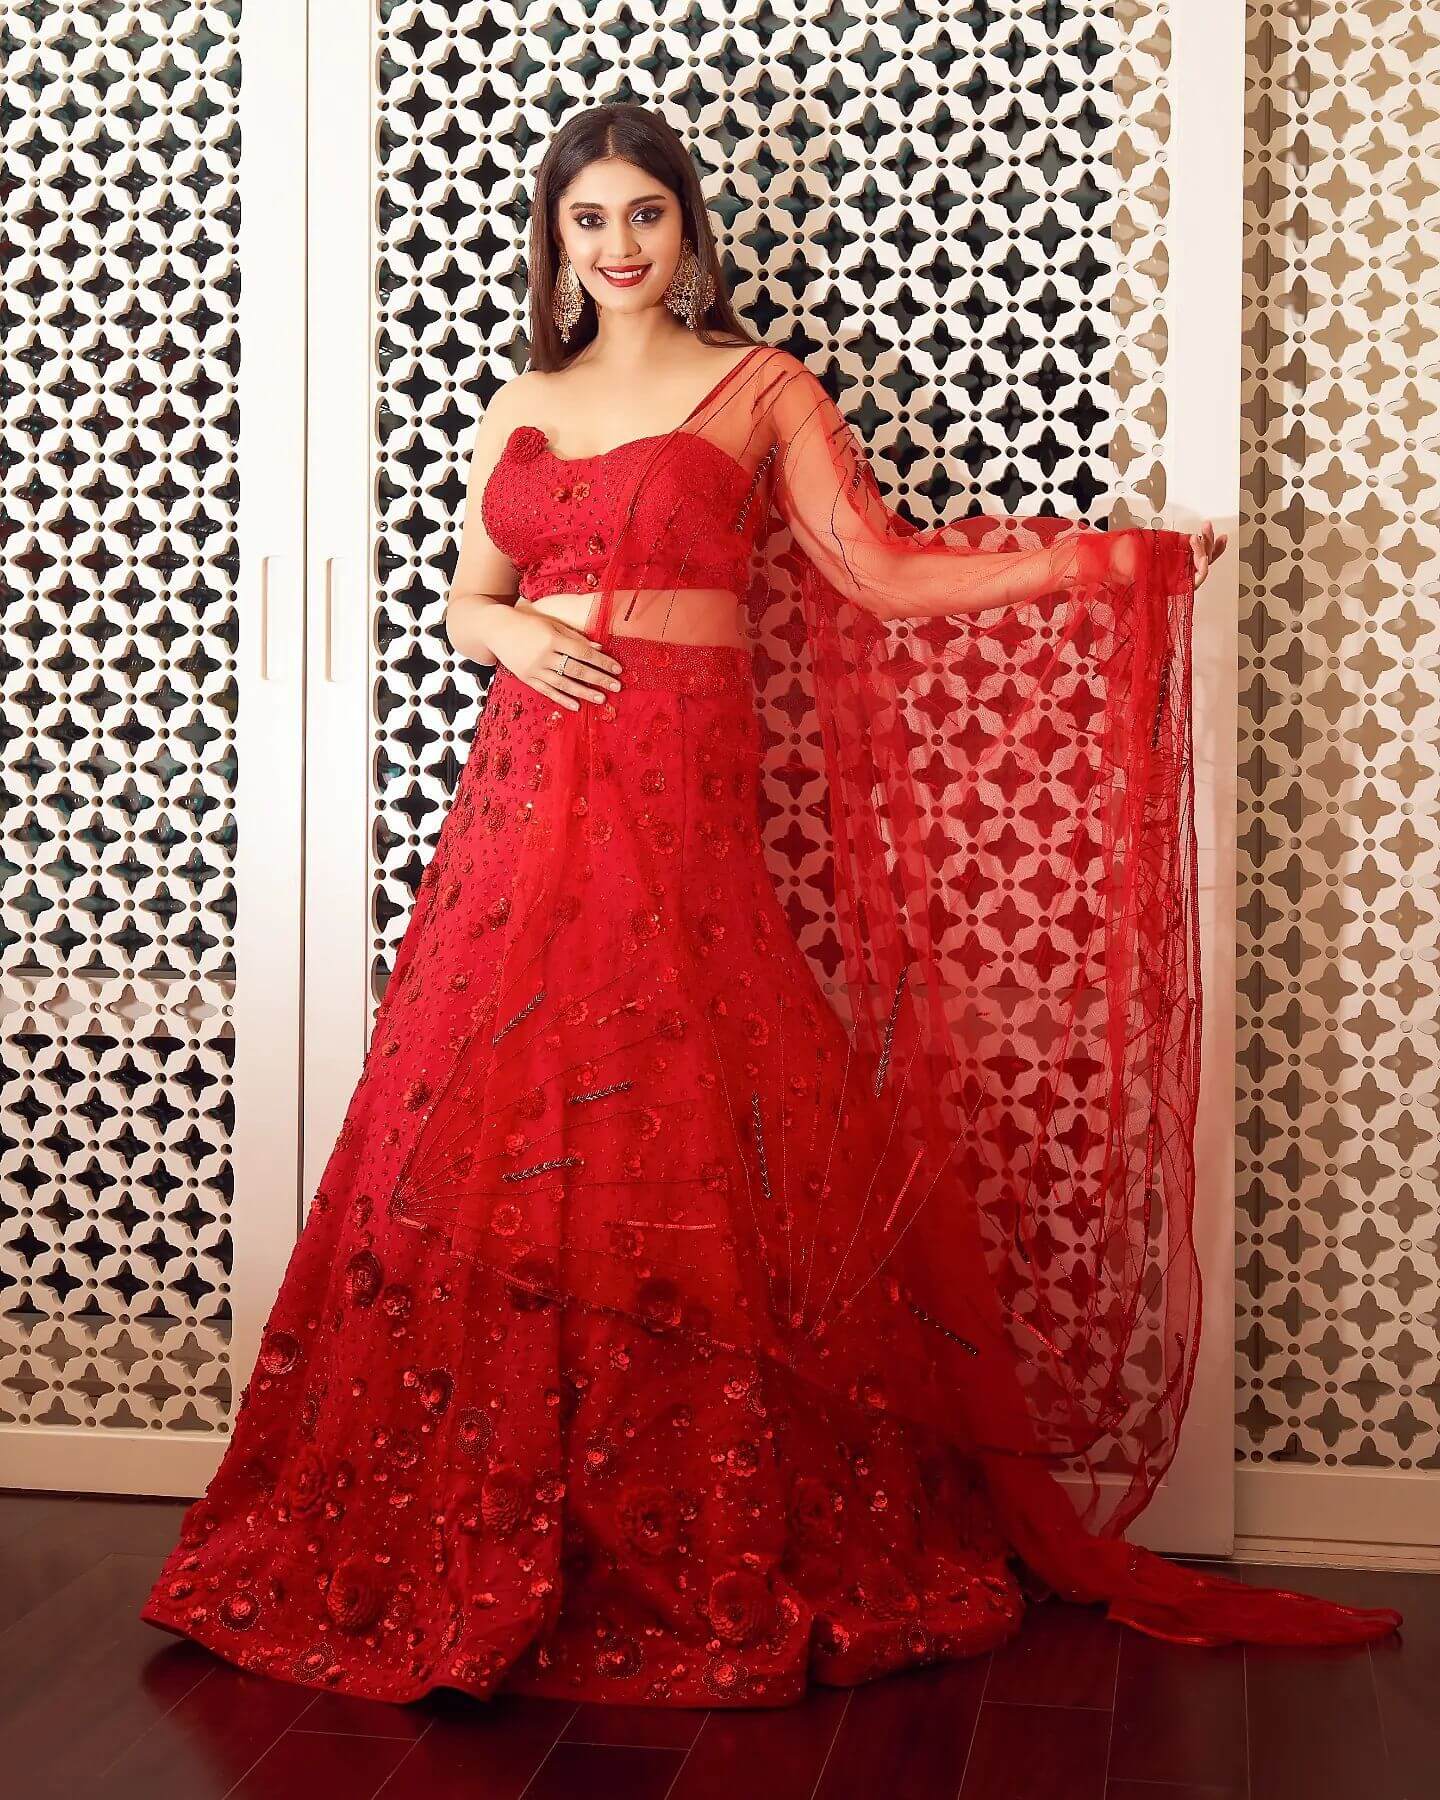 Surbhi Puranik Lovely Outfits & Pretty Looks Beautiful In Red Off-Shoulder Sweetheart Neck Lehenga 